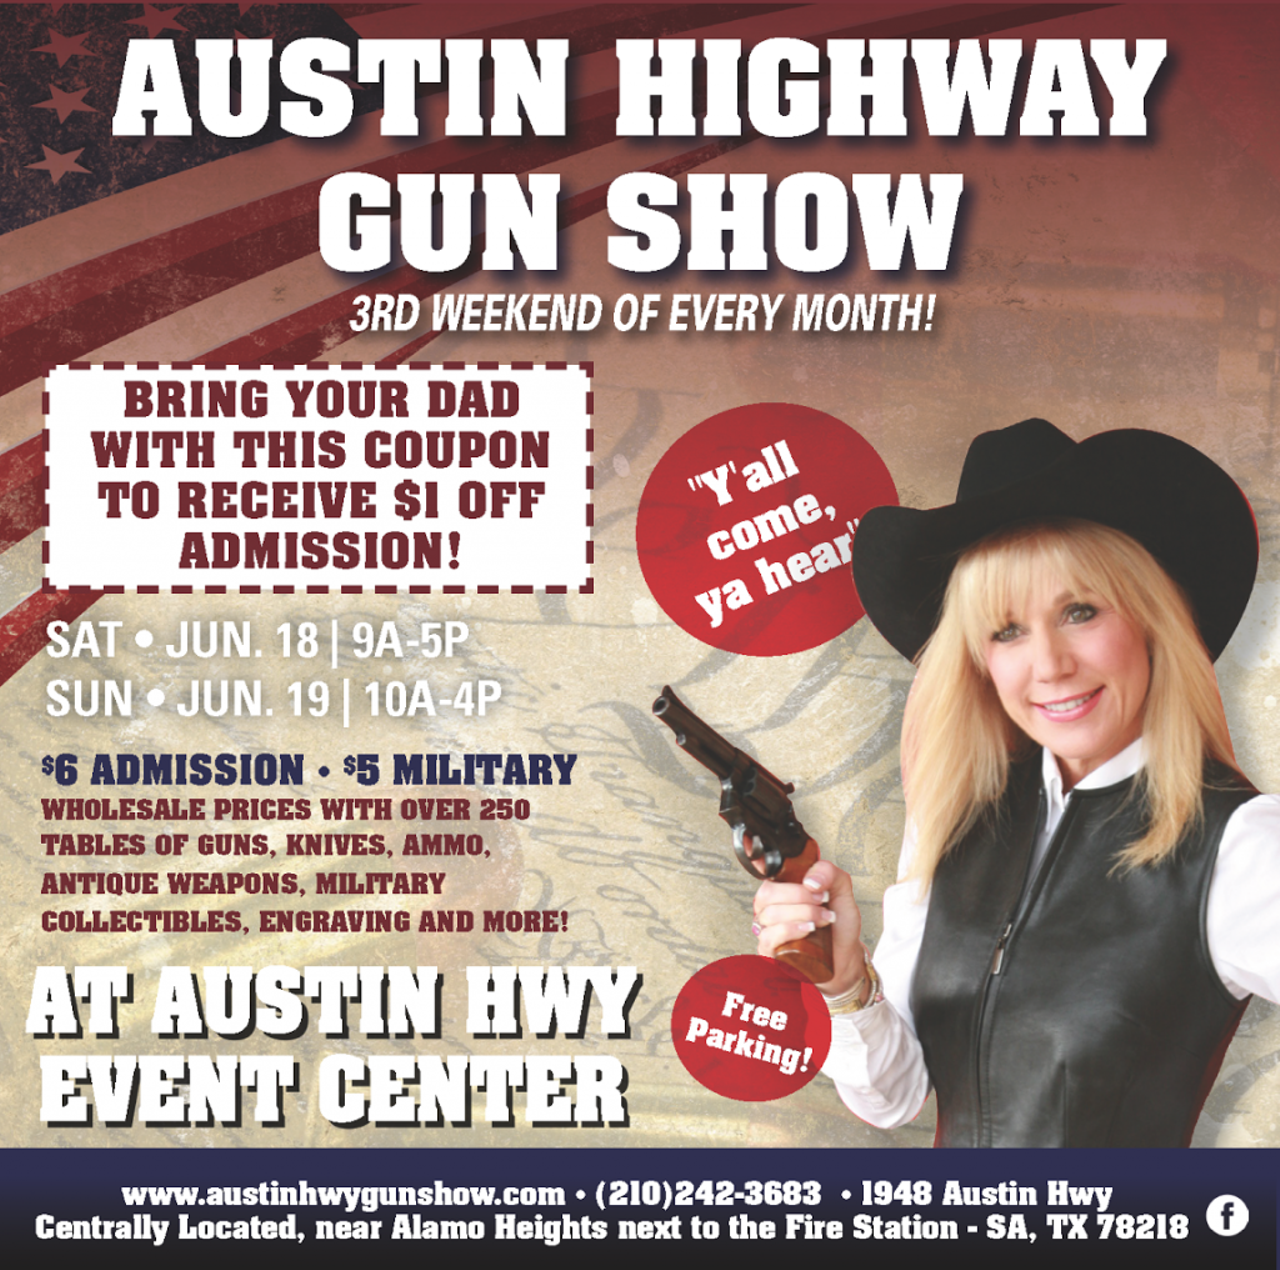 Austin Hwy Gun Show &#149;?? 1948 Austin Hwy
The third weekend of every month the Austin Highway Gun Show which takes place at the Austin Highway Event Center.  Bring your dad this weekend and receive $1 off admission.  They have wholesale prices with over 250 tables with guns, knives, ammo, antique weapons, military collectibles, engraving and more.
austinhwygunshow.com